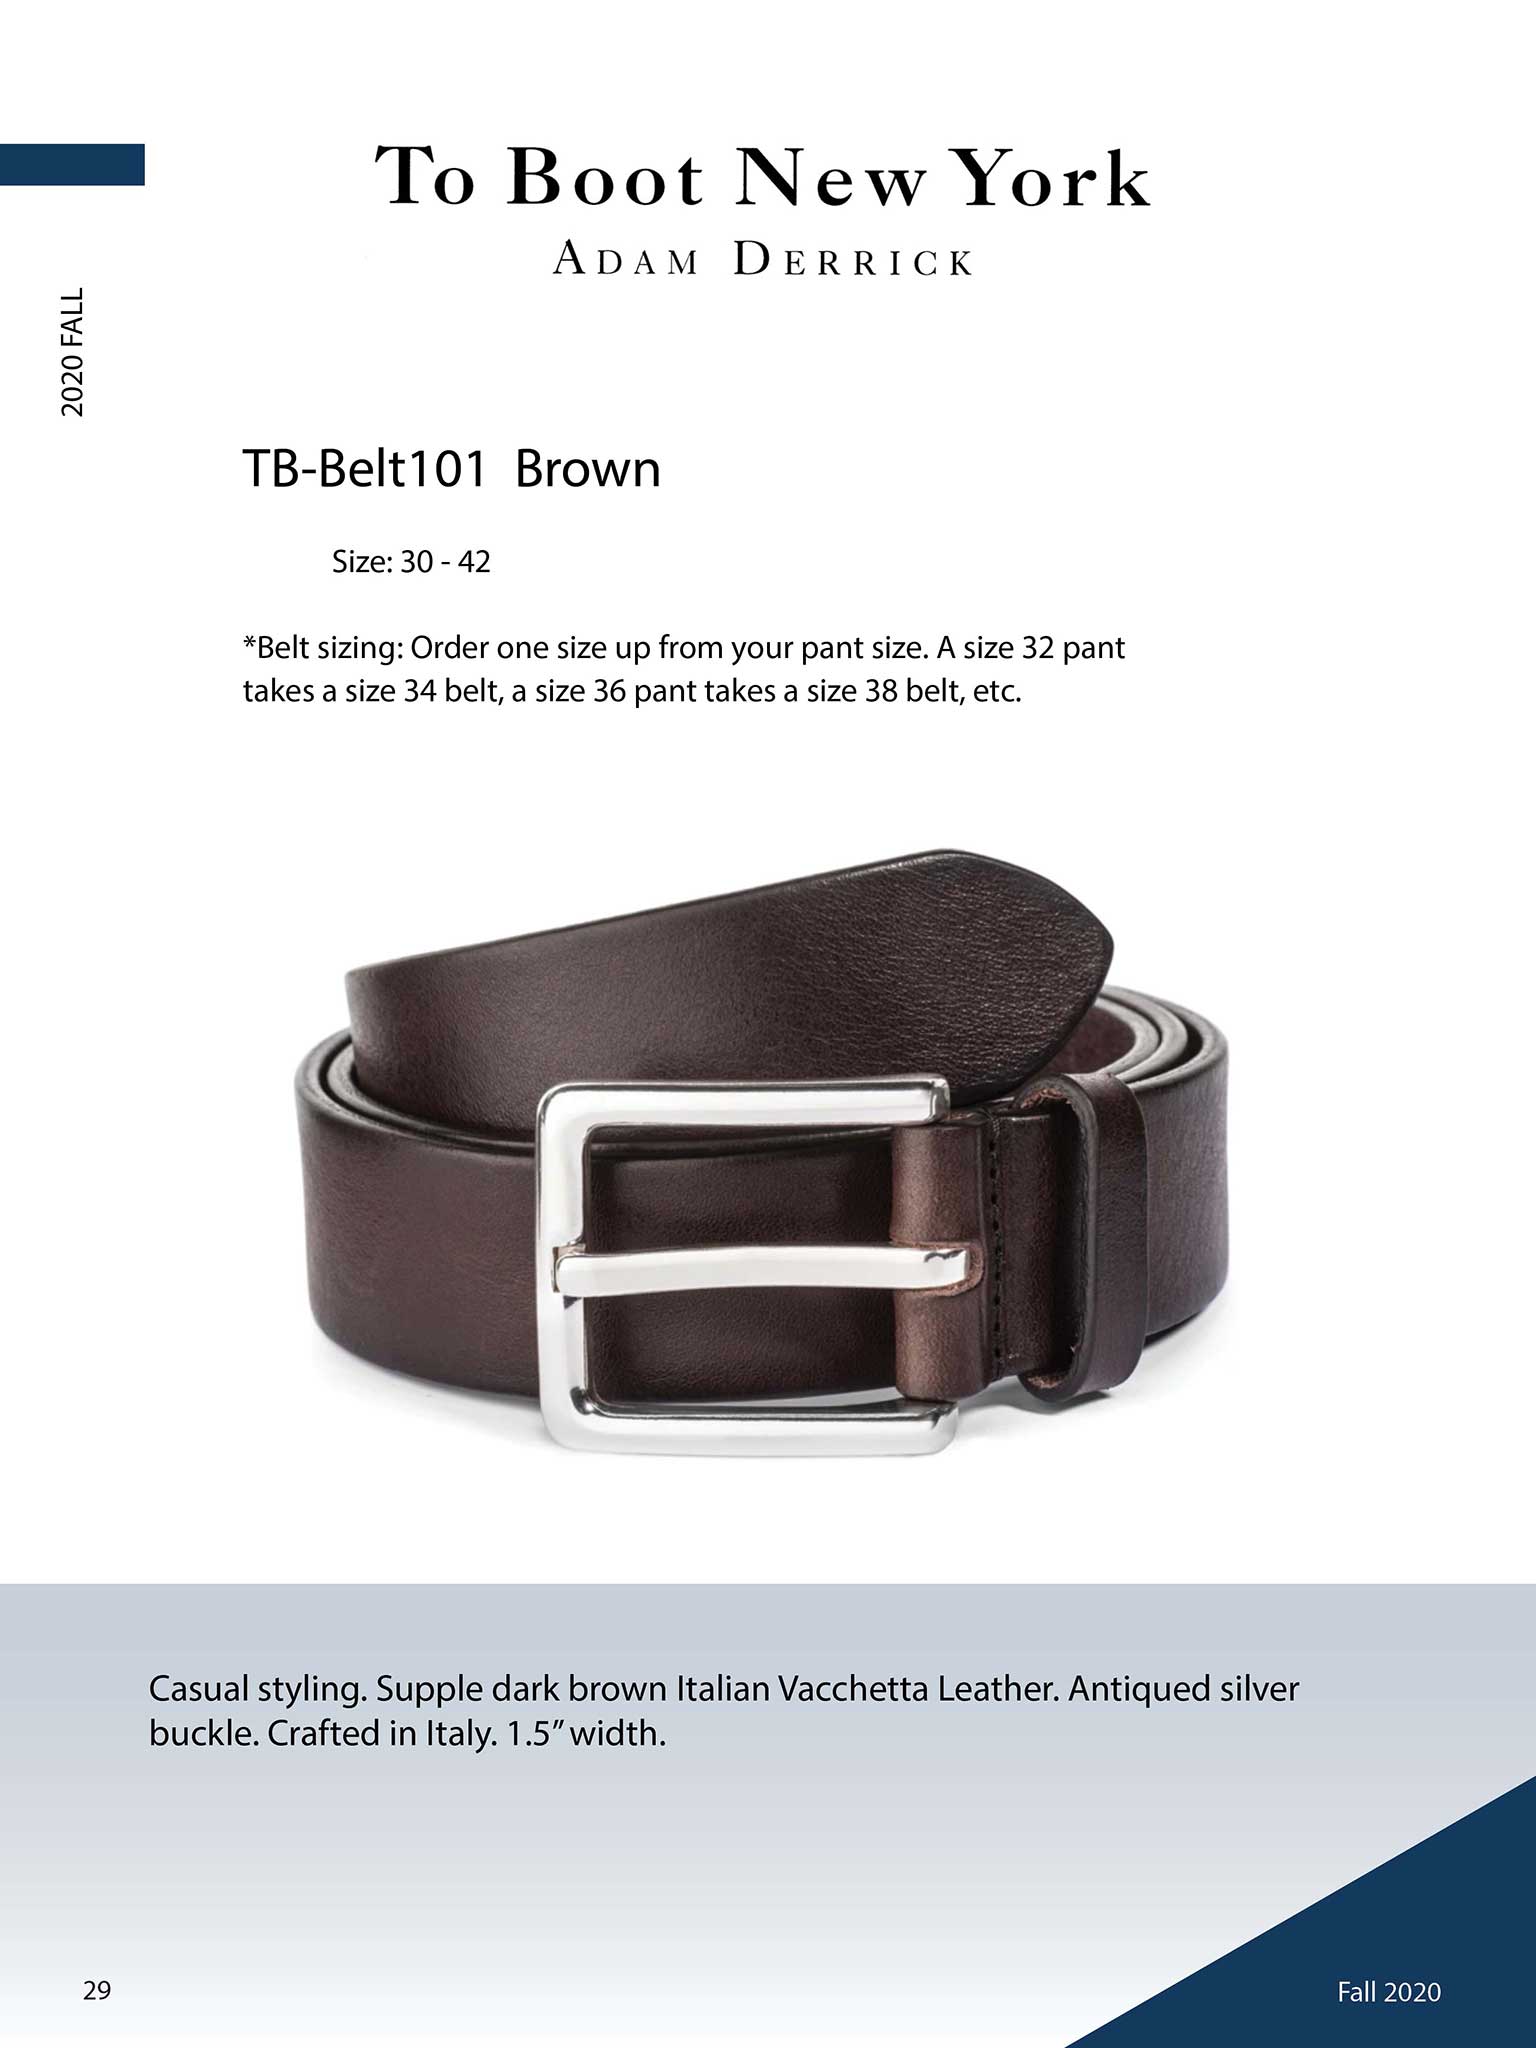 To Boot New York                                                                                                                                                                                                                                          , Brown Leather Belt by To Boot New York